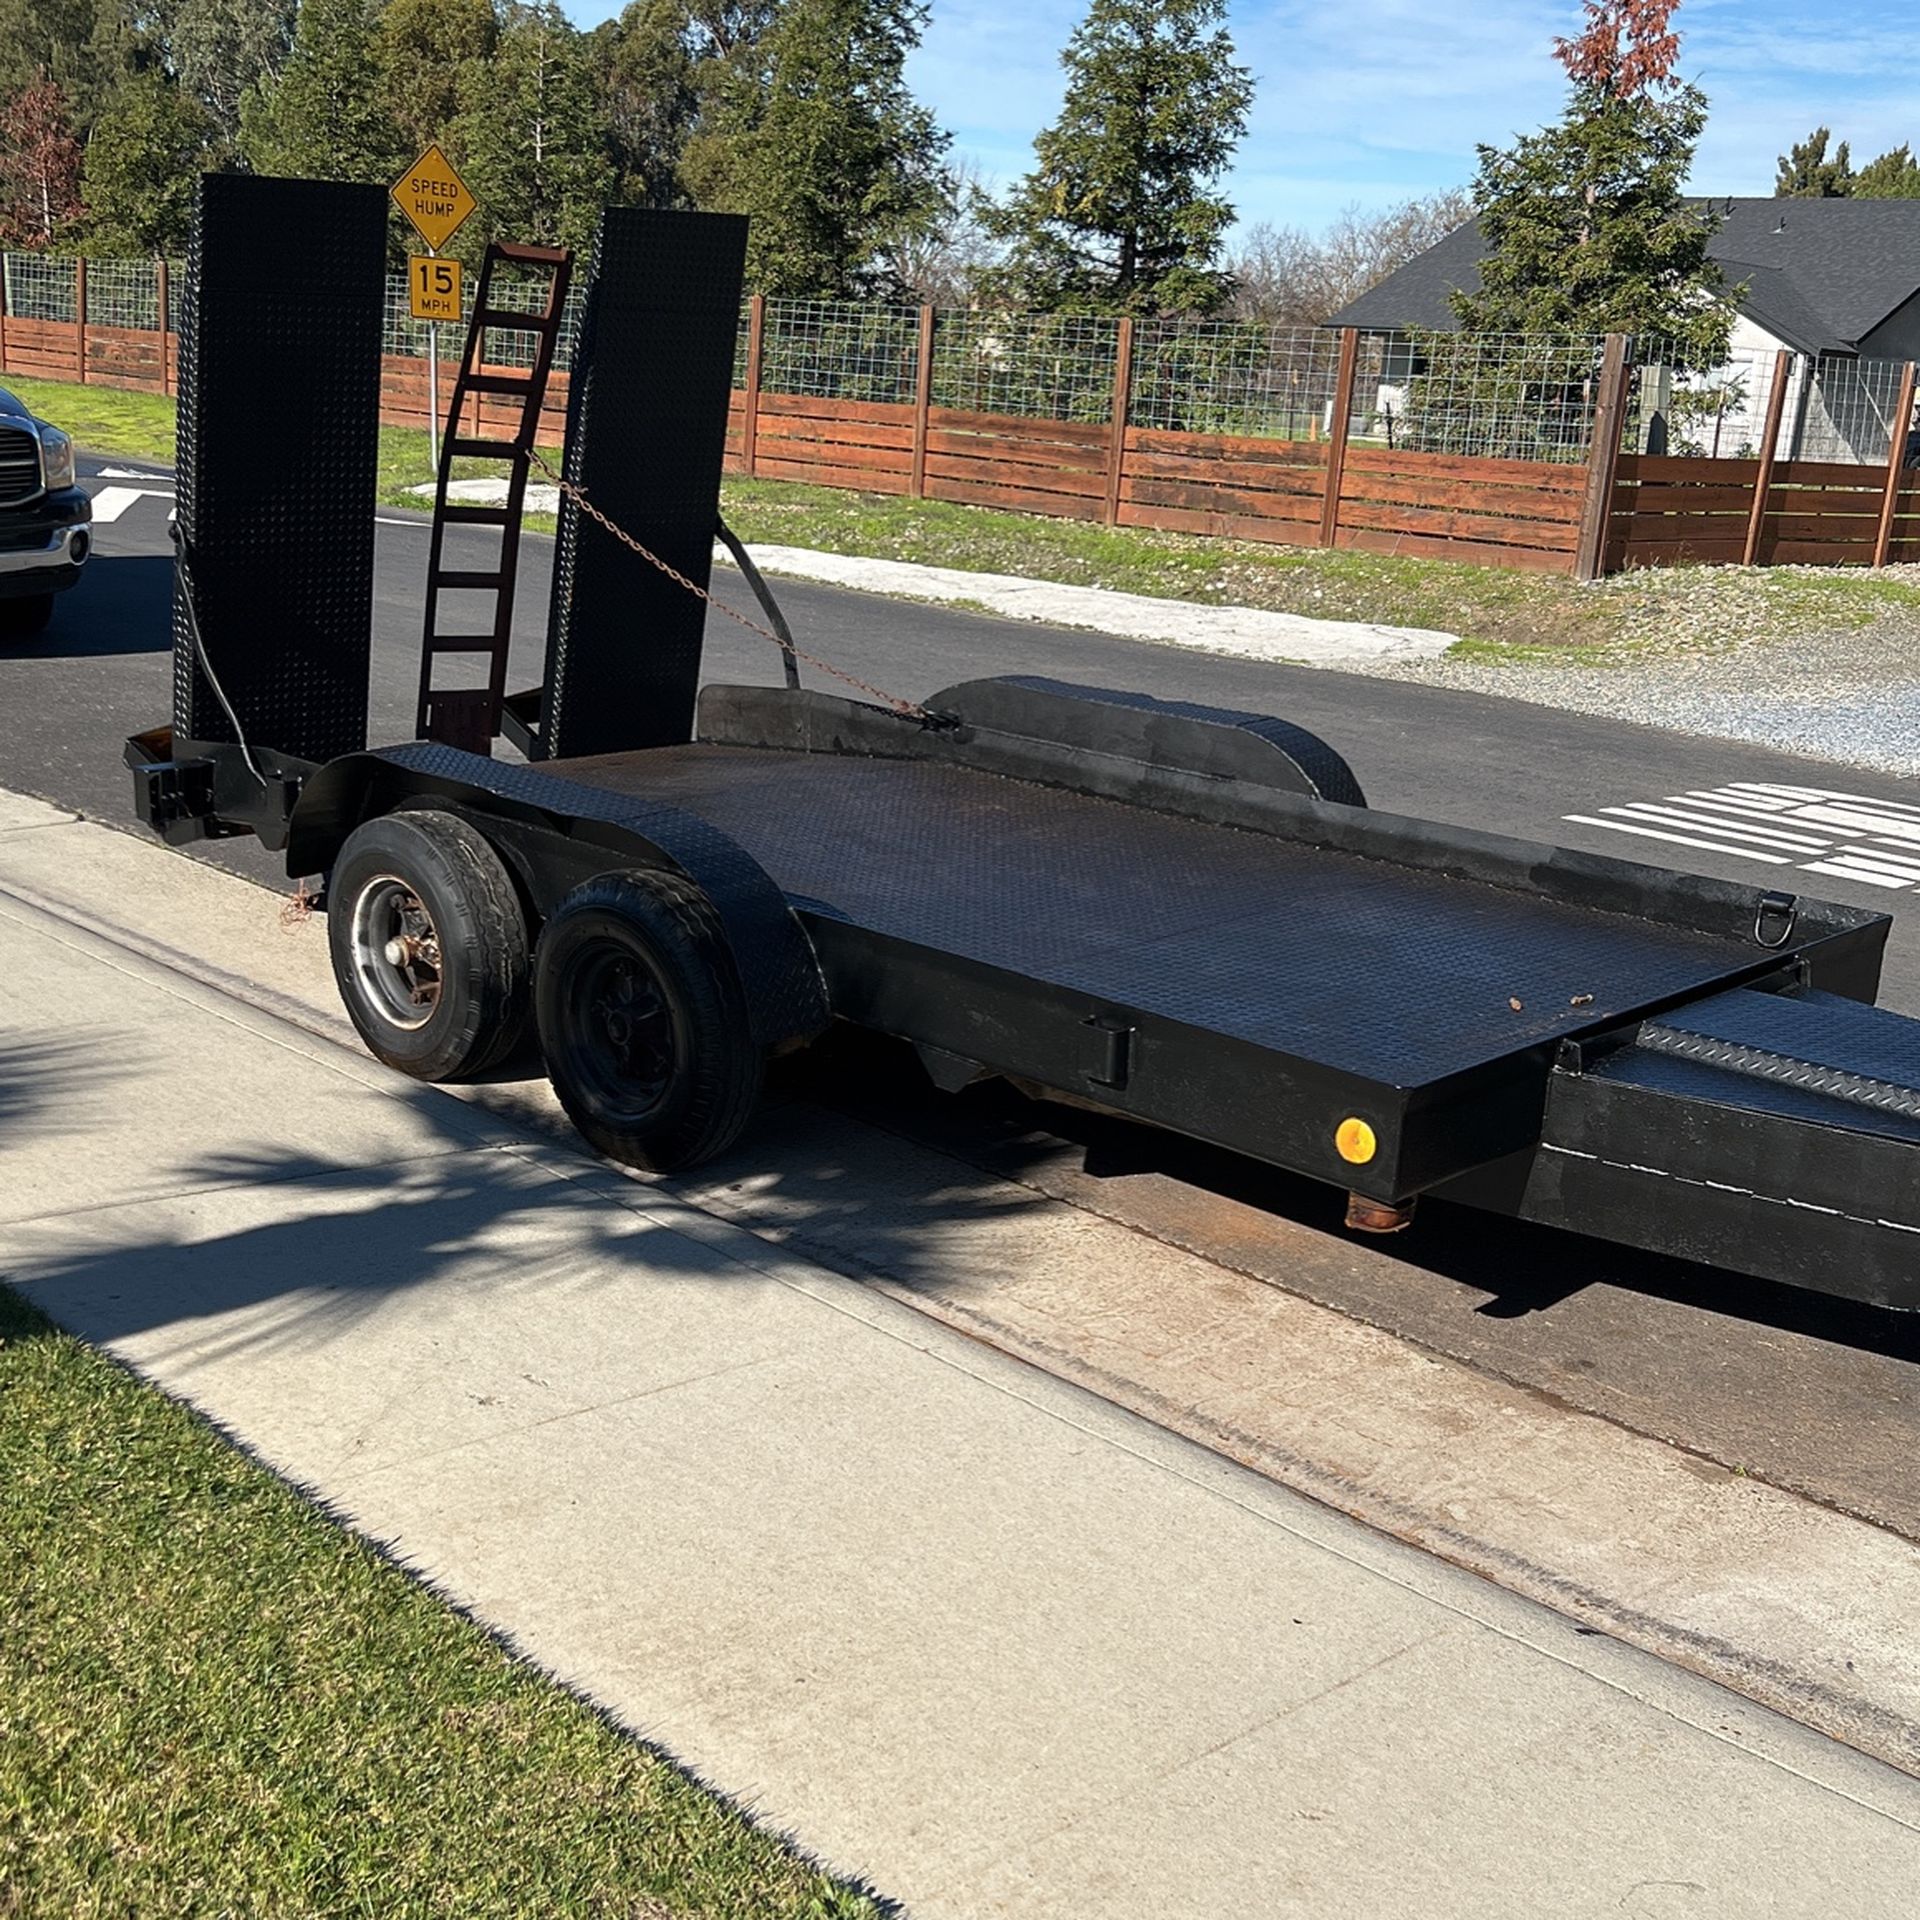 Knutson Trailer heavy duty for backhoe, a bobcat, diamond plate, all around 14 foot bed, but heavy duty ramps